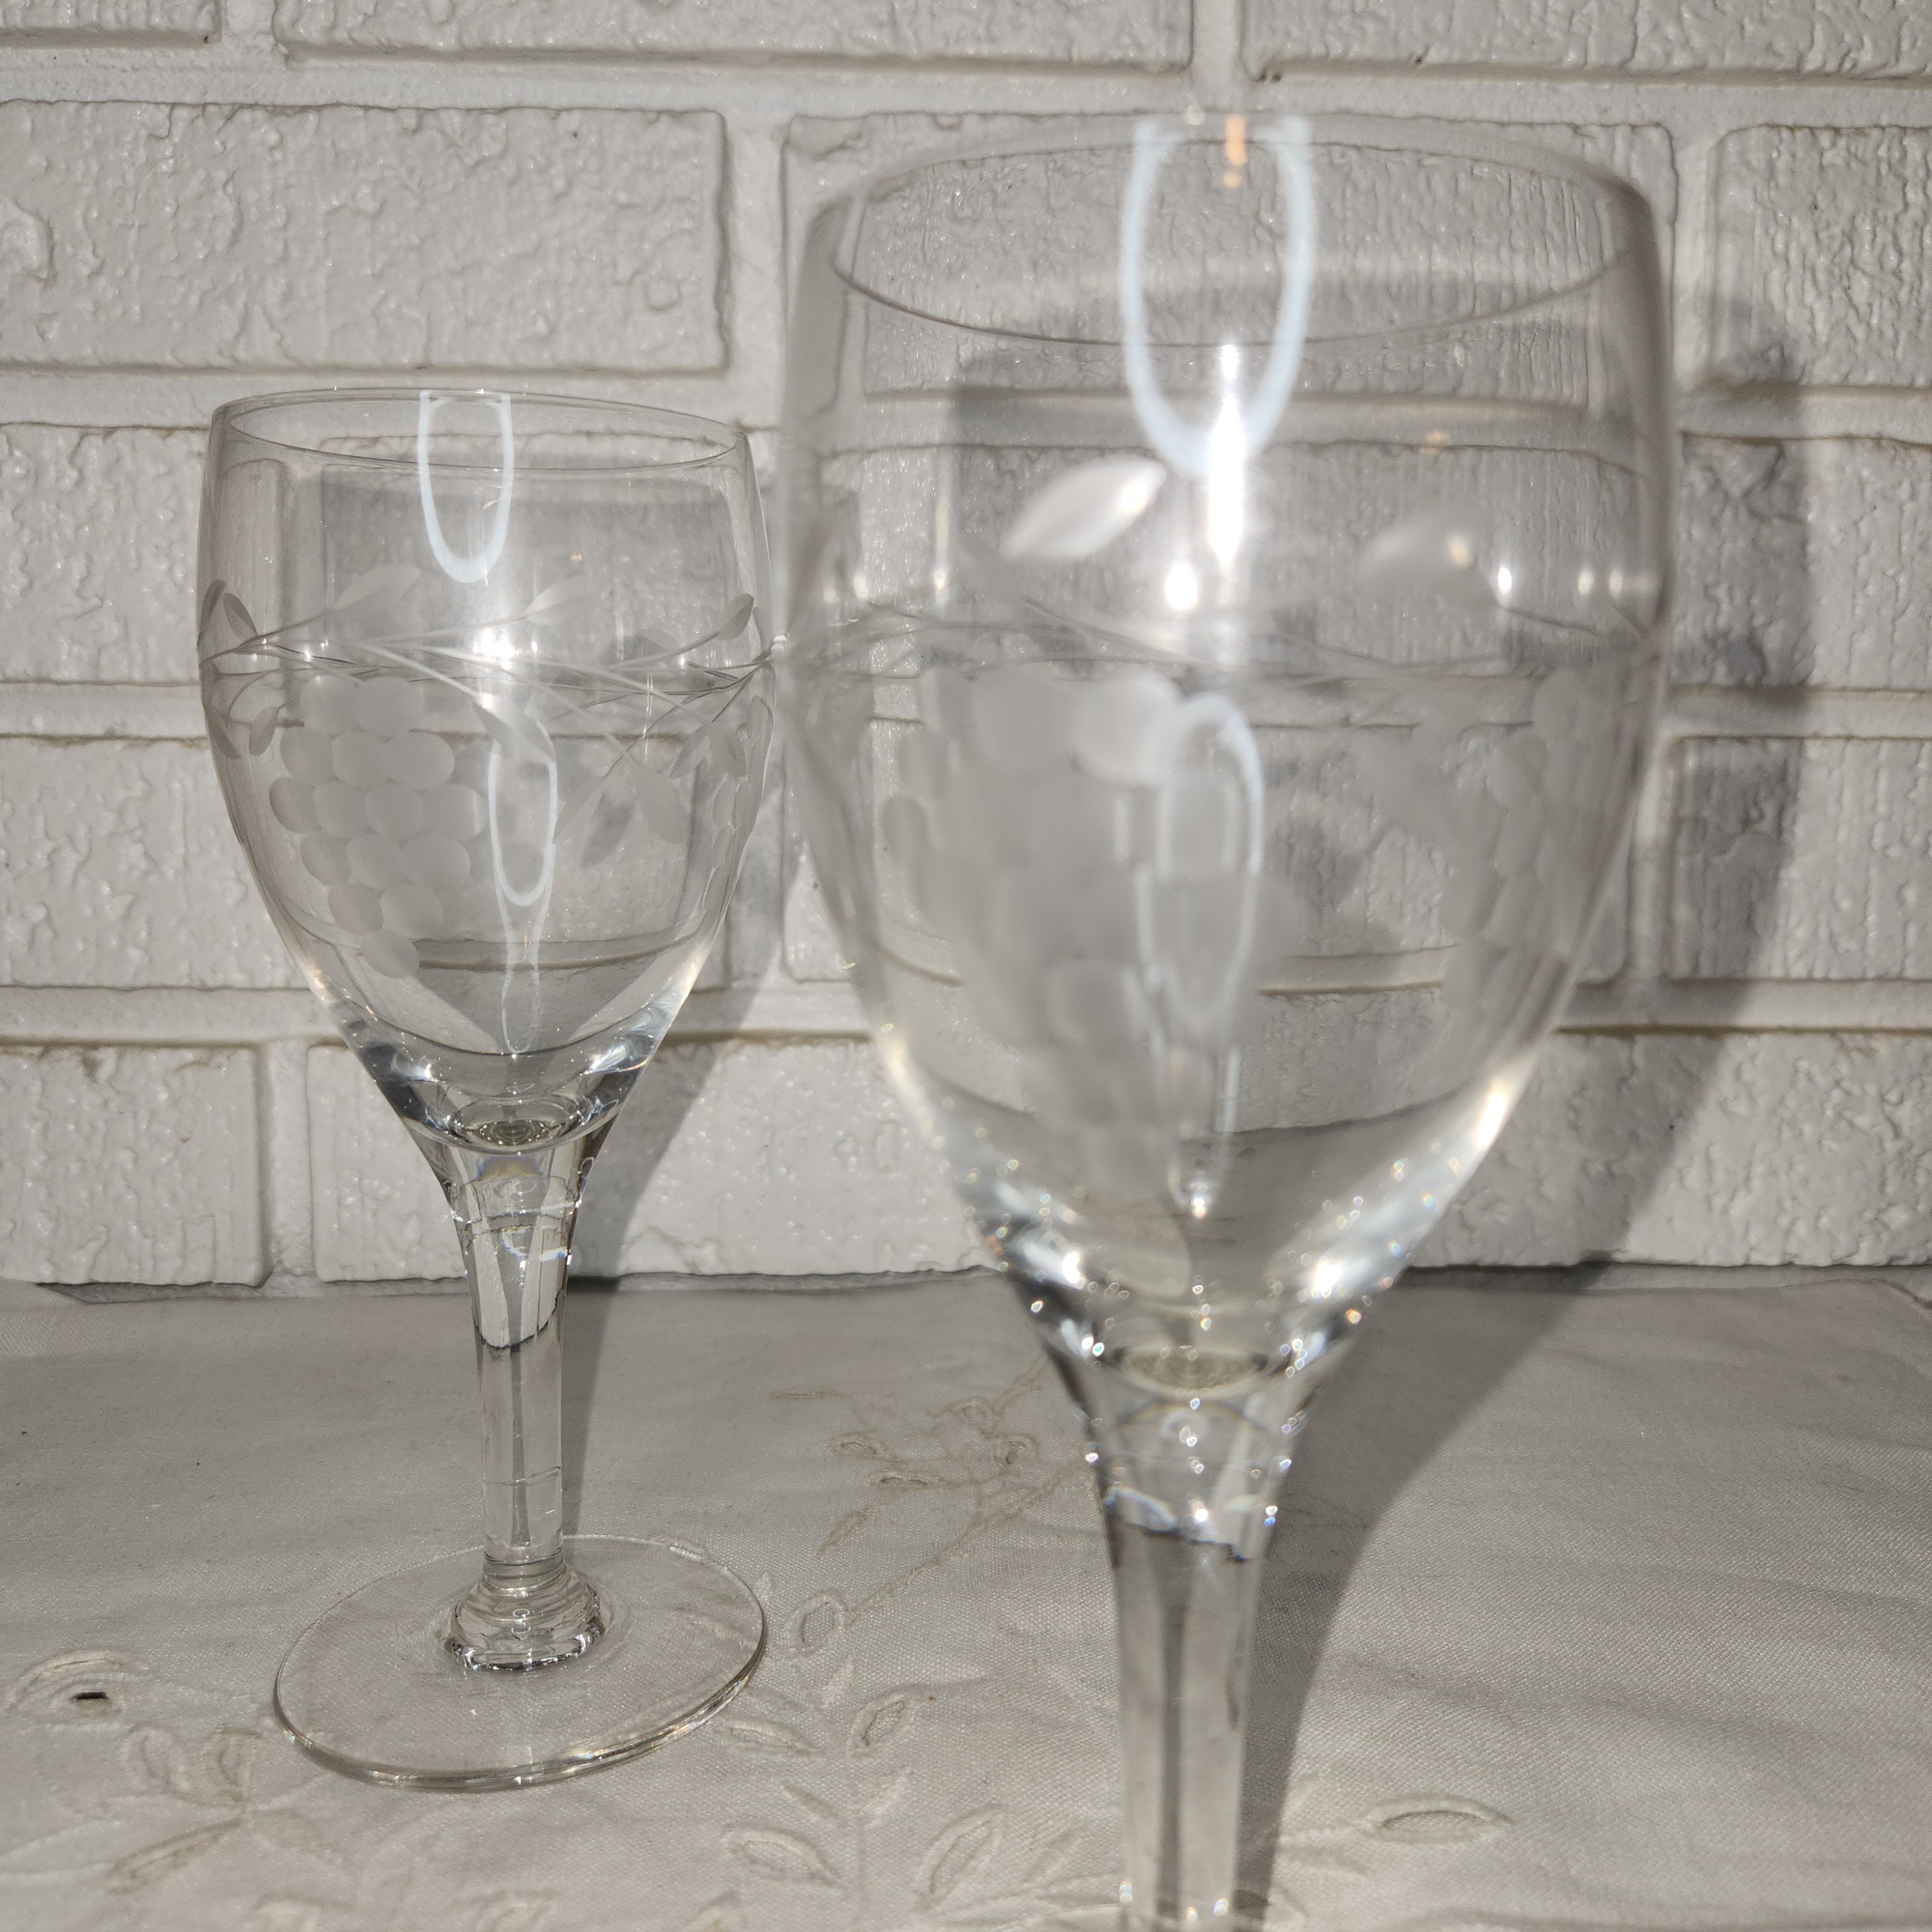 Kathy Barnard Studio — Fancy Orchids with Bees Wine glasses